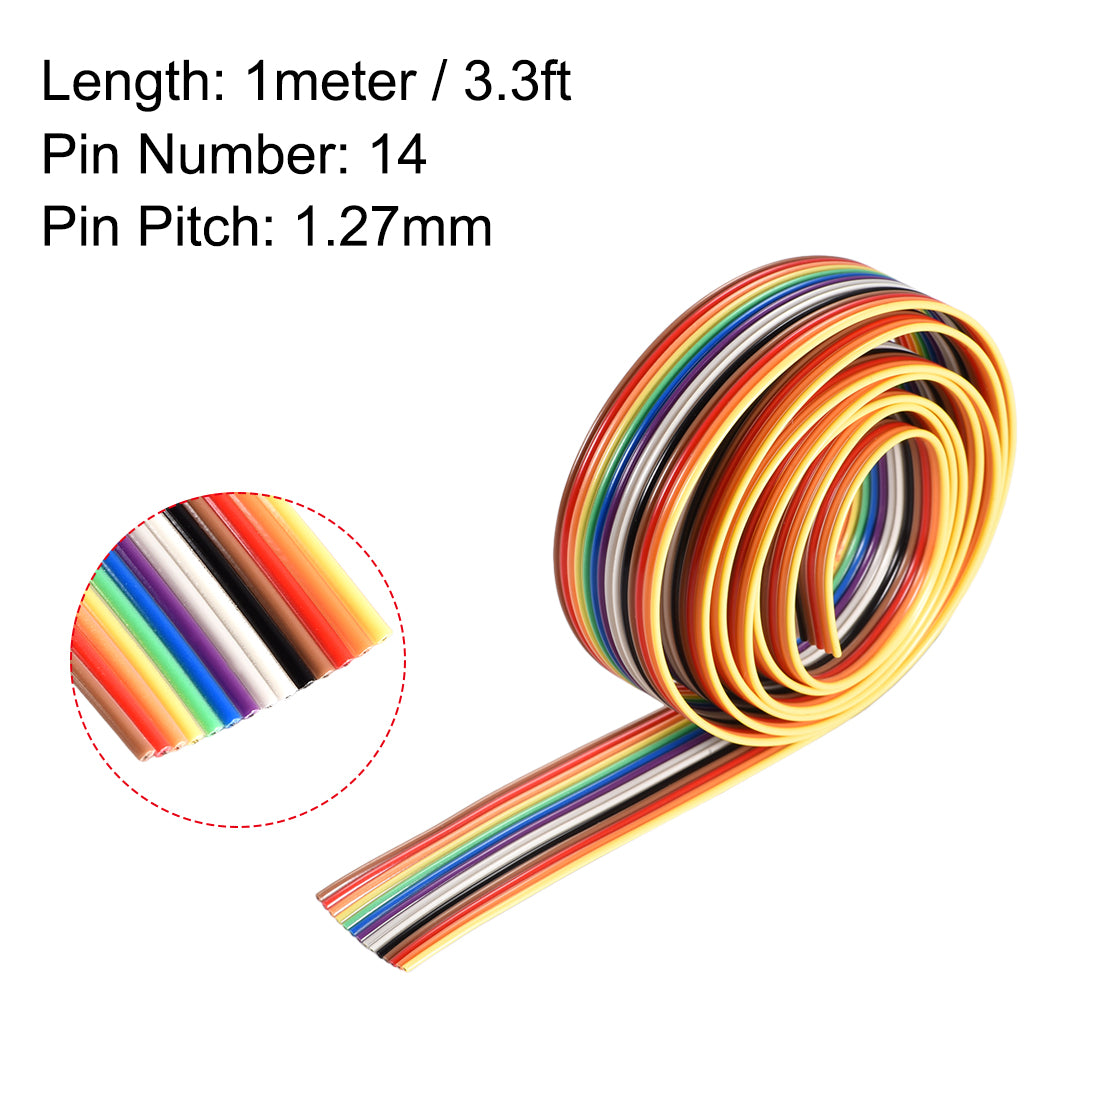 uxcell Uxcell IDC Rainbow Wire Flat Ribbon Cable 14P 1.27mm Pitch 1meter/3.3ft Length